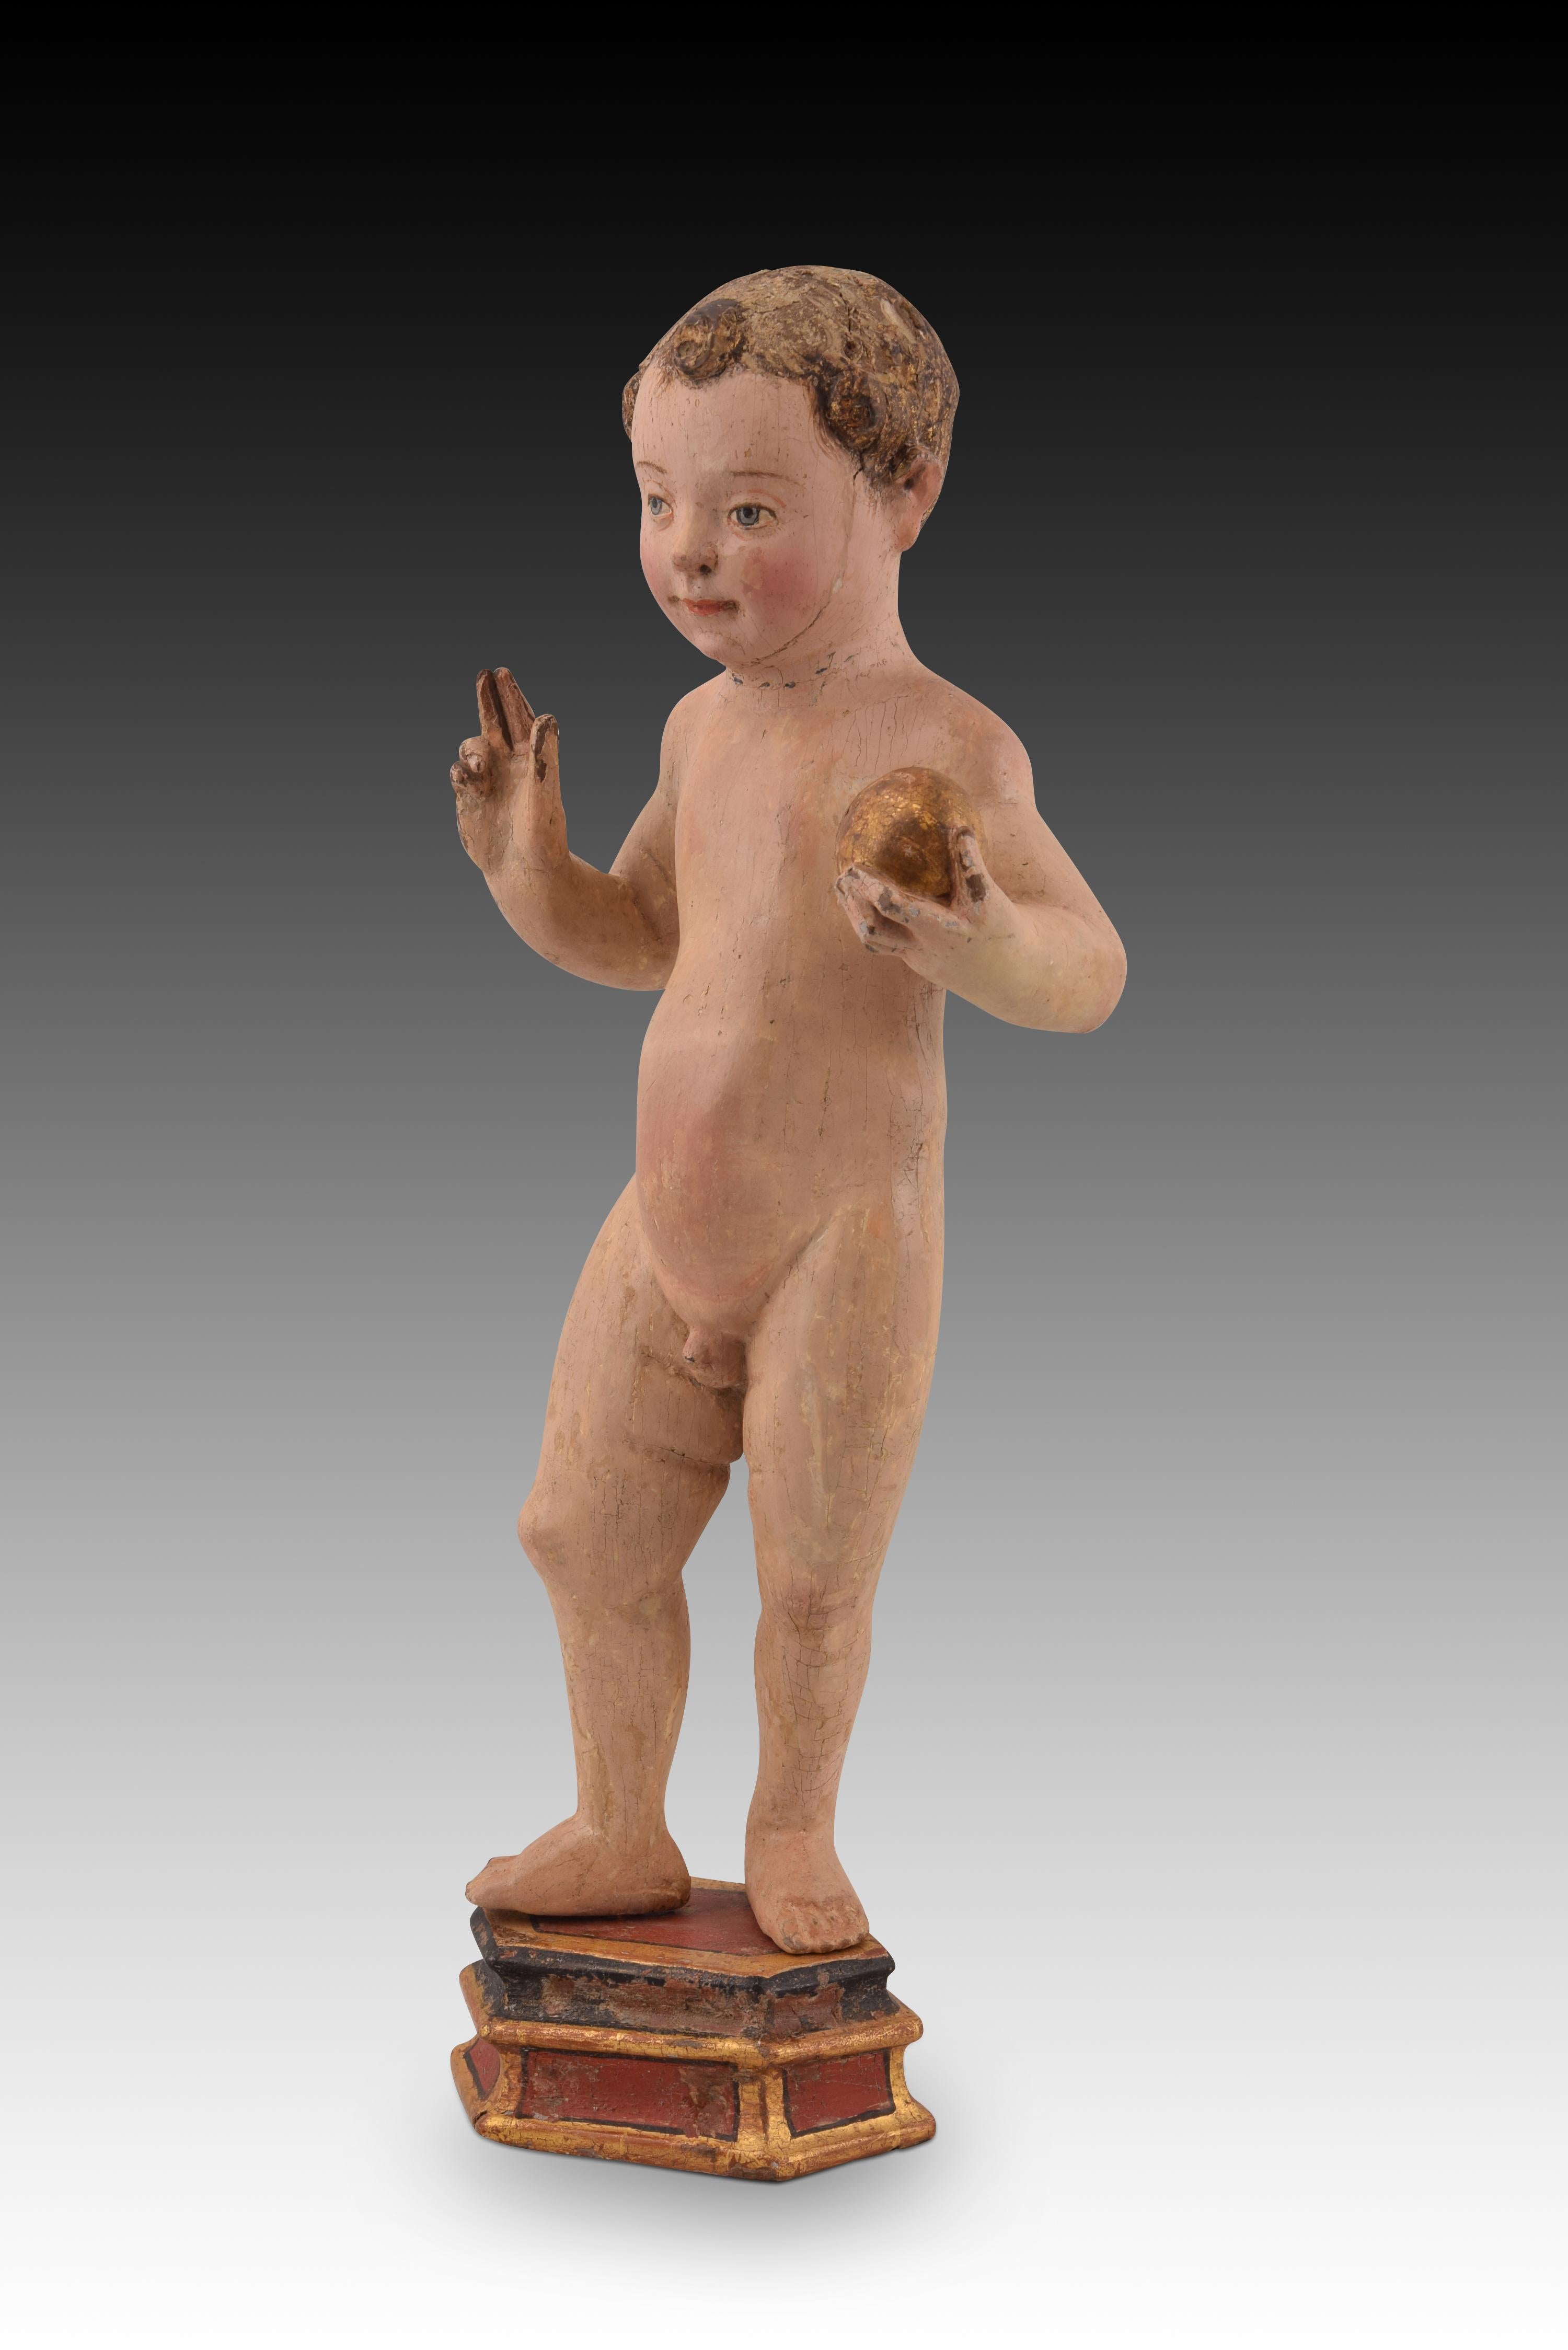 Baby Jesus on pedestal. Polychrome wood. Flemish school, 16th century, with restorations. 
Carved and polychrome wooden Child Jesus standing on a pedestal of the same material, standing, advancing, with his right hand blessing and an orb in his